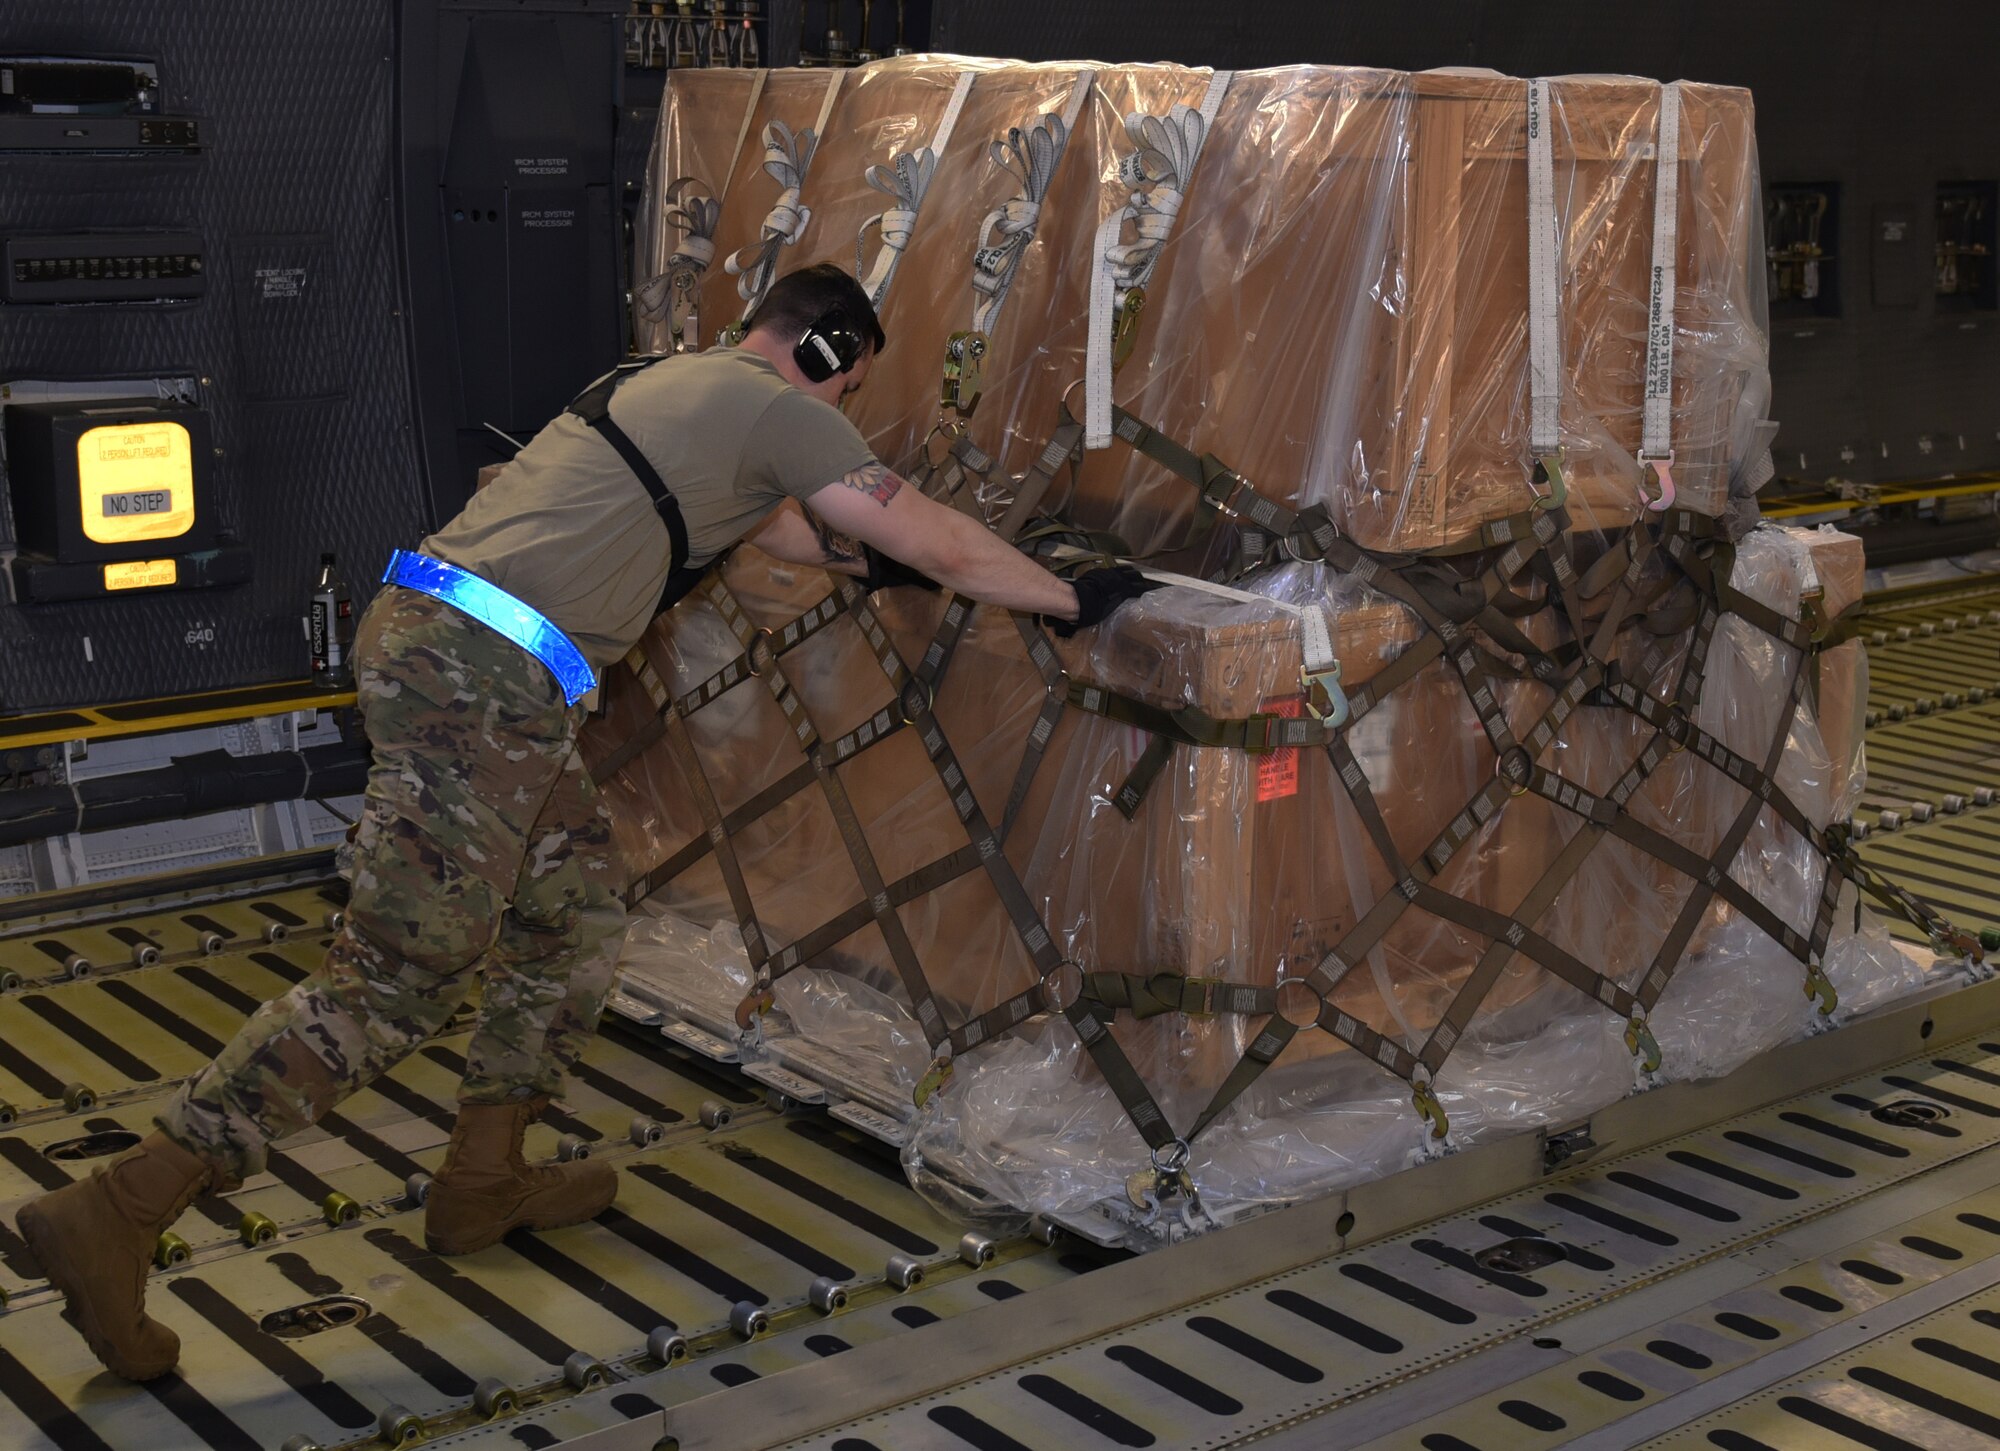 U.S. Air Force Staff Sgt. Ryan Botts, 60th Aerial Port Squadron ramp services supervisor, pushes cargo onto a C-5M Super Galaxy Sept. 13, 2019, at Travis Air Force Base, California. Mobility Guardian 2019 is Air Mobility Command’s largest enterprise-wide training event with more than 4,000 joint and international personnel integrated to hone teamwork and improve longstanding partnerships. MG19 also validates the Air Force’s readiness to conduct mobility operations in contested, degraded and operationally-limited environments. (U.S. Air Force photo by Airman 1st Class Cameron Otte)